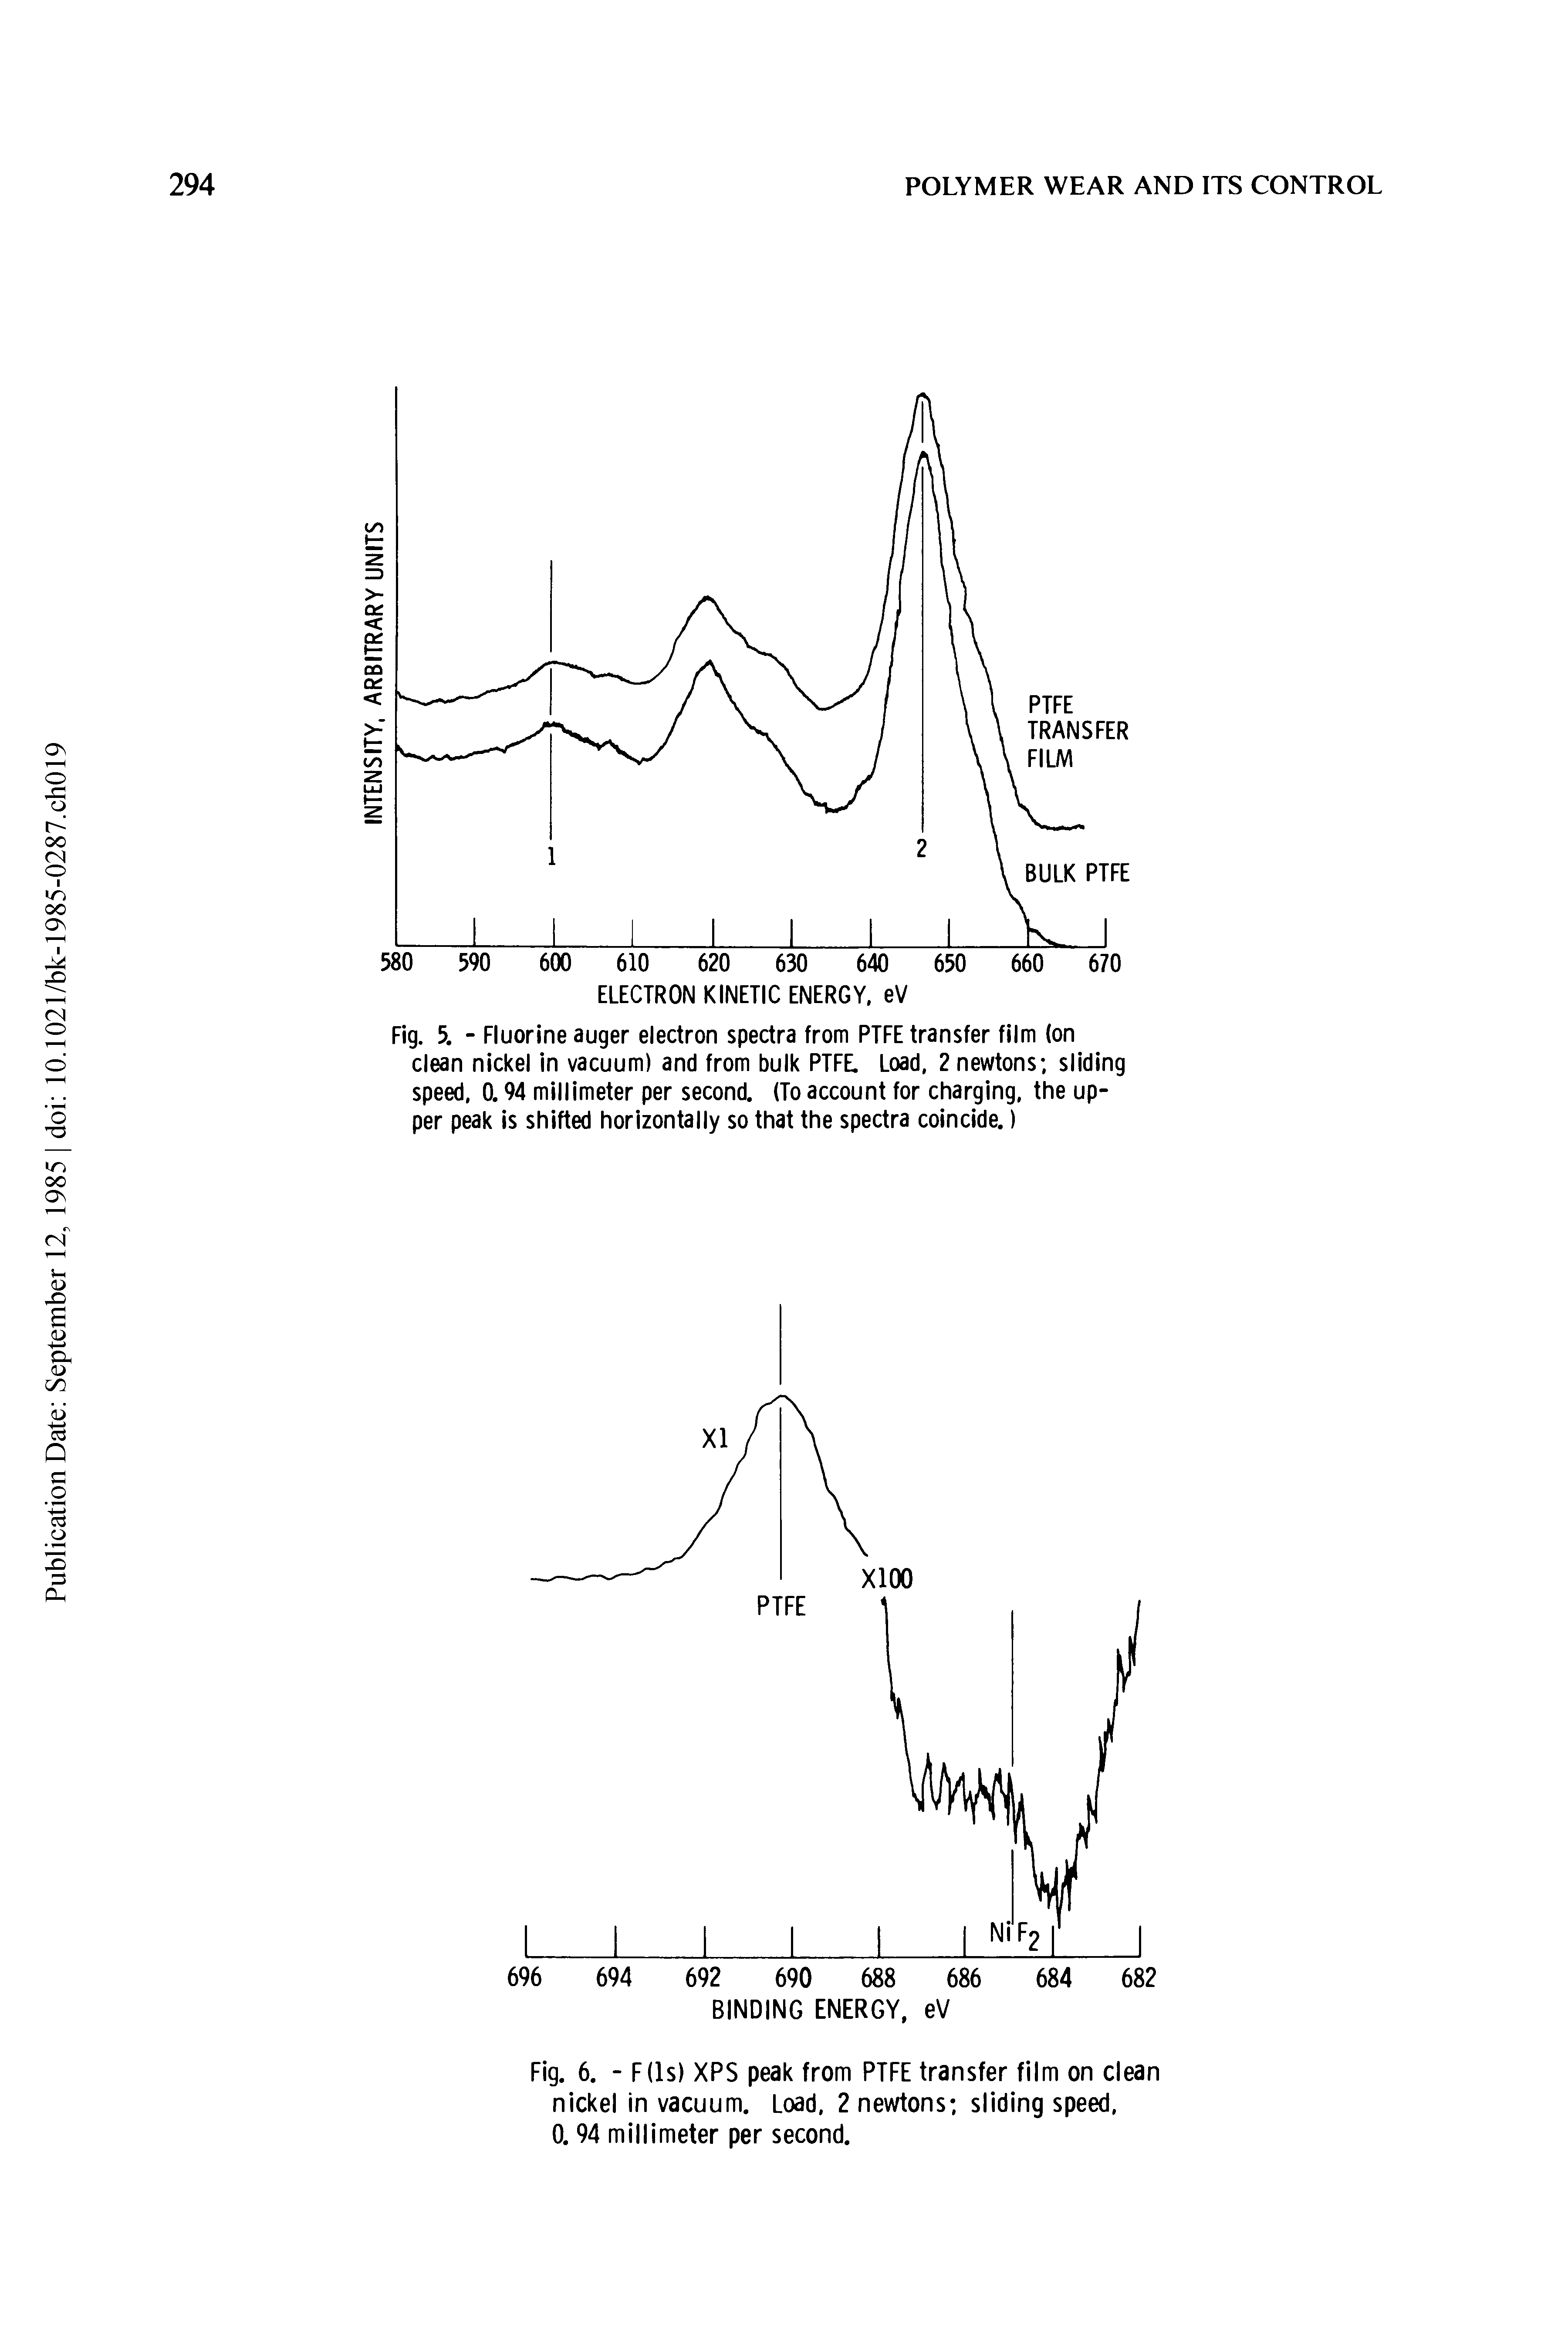 Fig. 5. - Fluorine auger electron spectra from PTFE transfer film (on clean nickel in vacuum) and from bulk PTFE. Load. 2 newtons sliding speed. 0.94 millimeter per second. (To account for charging, the upper peak Is shifted horizontally so that the spectra coincide.)...